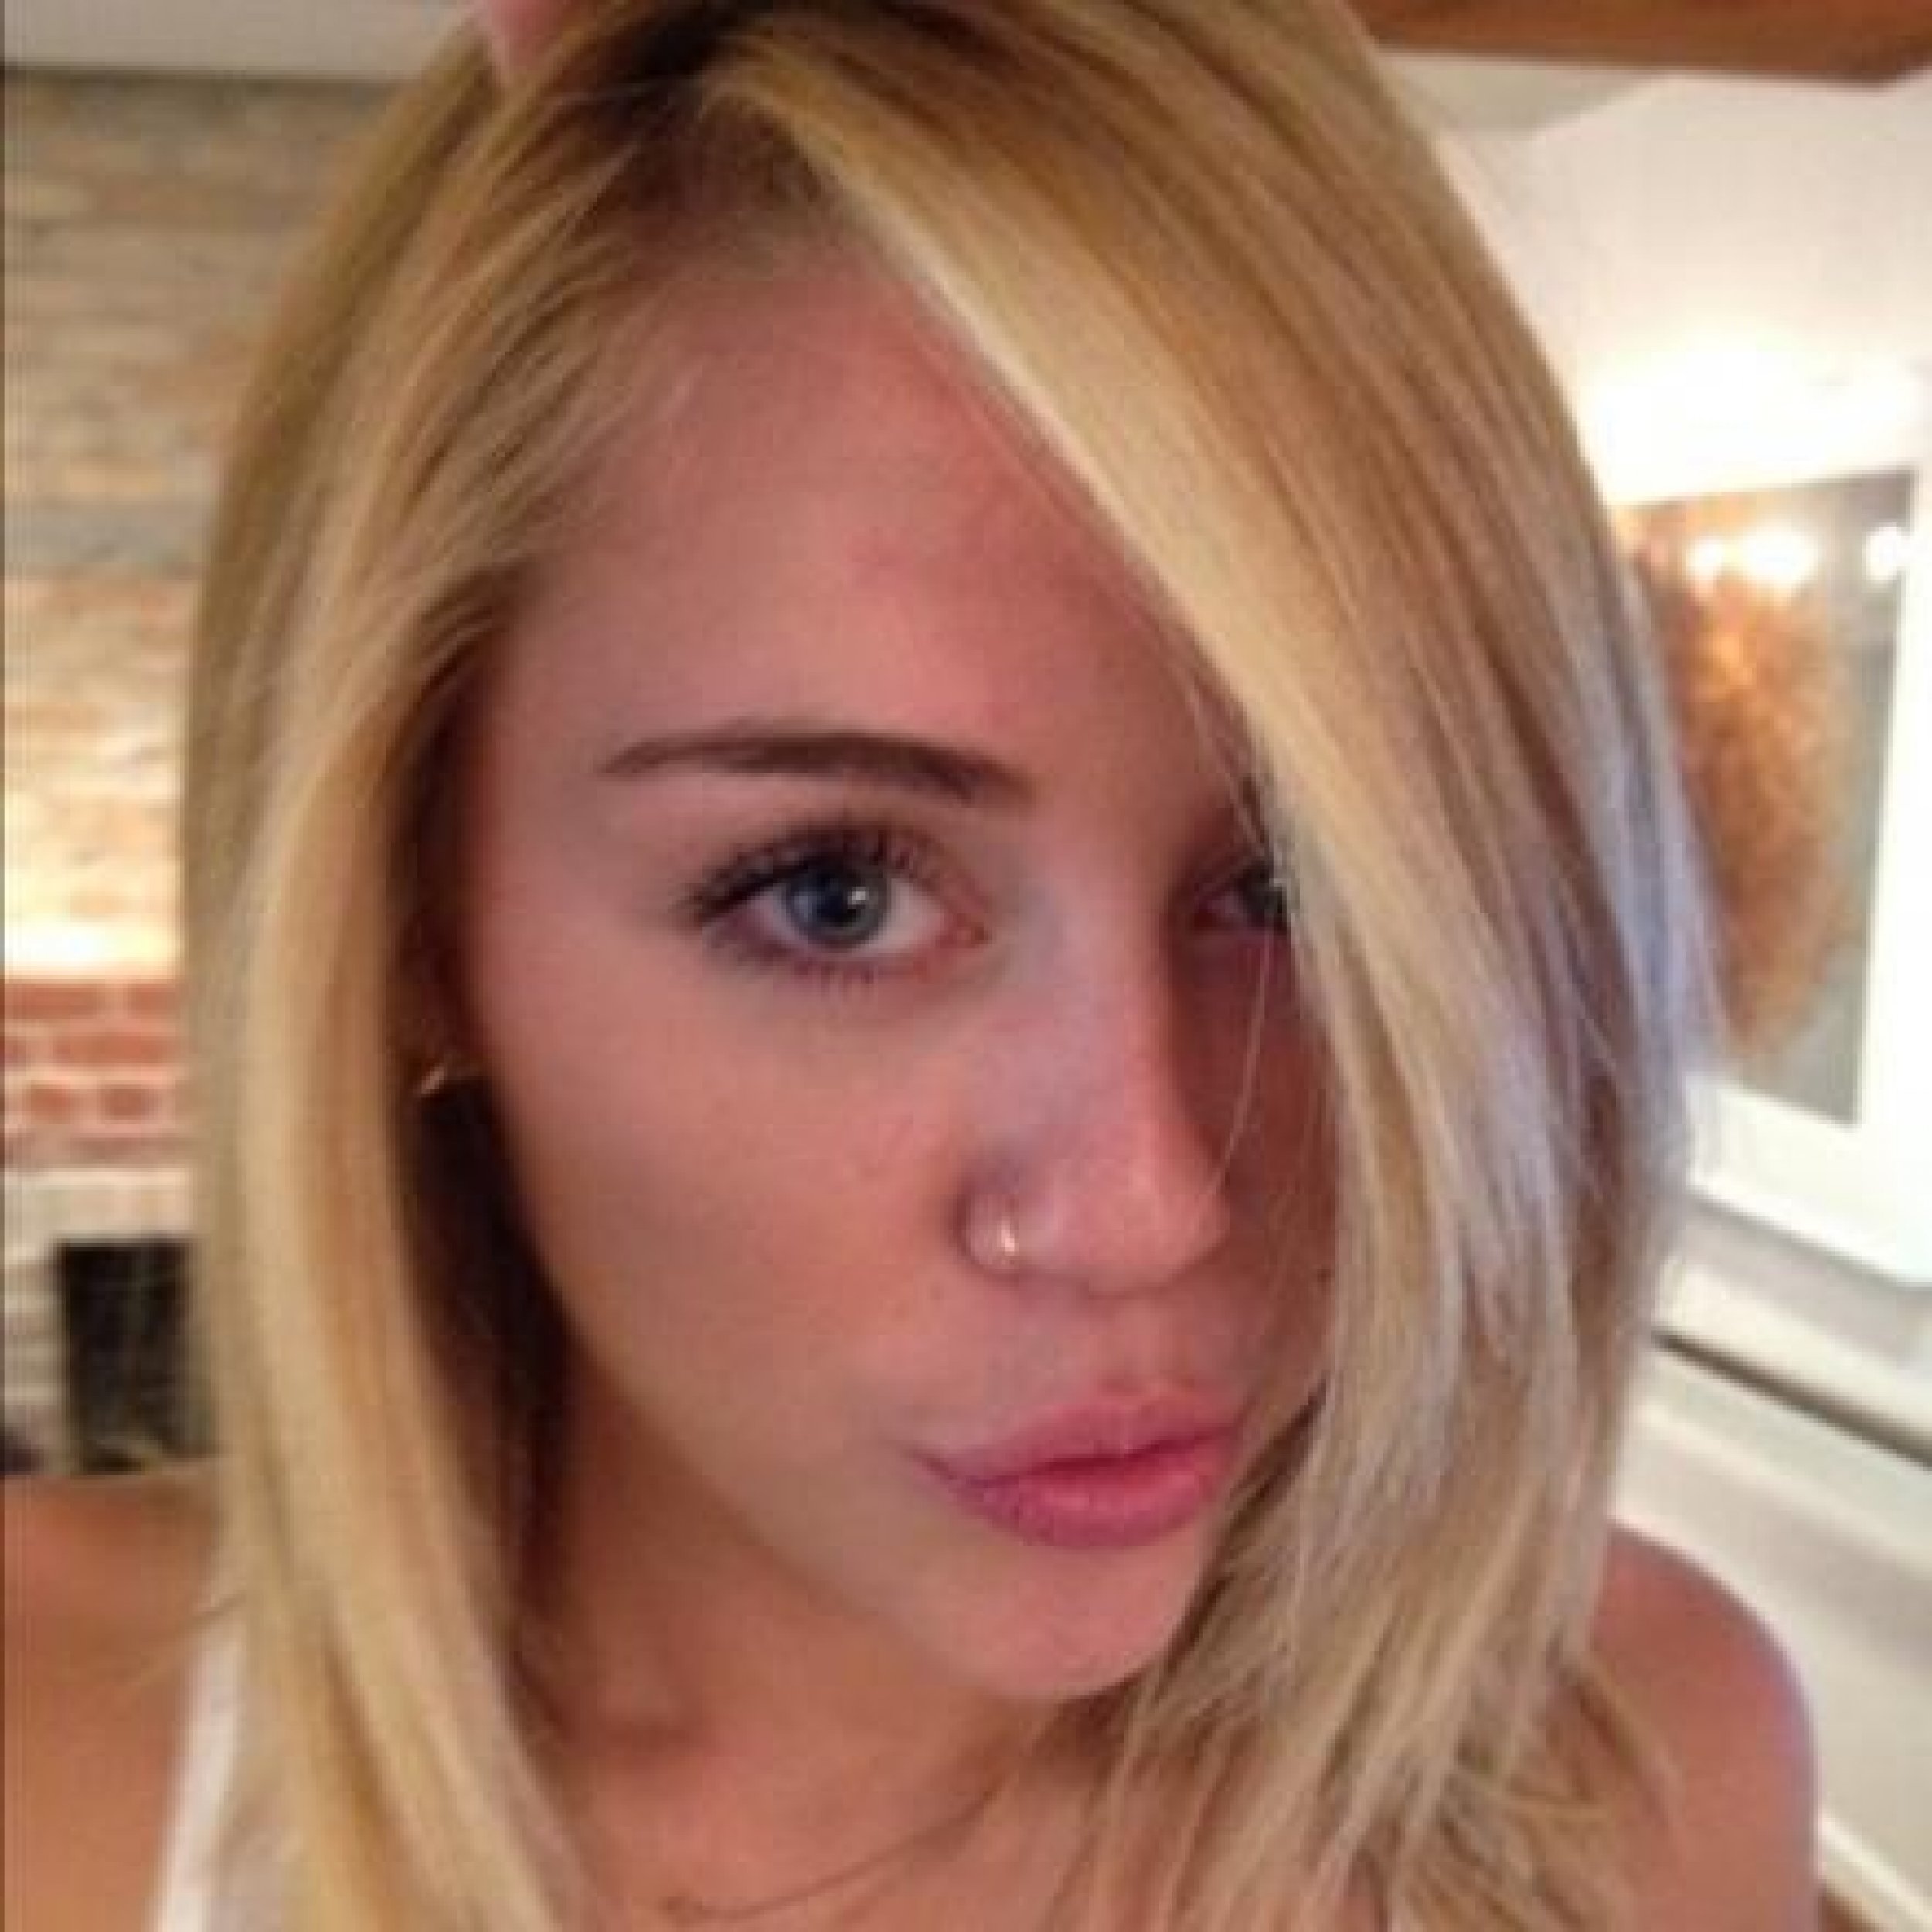 Miley Cyrus Naked Photo Surfaces Where To Find Photo Meant Only For